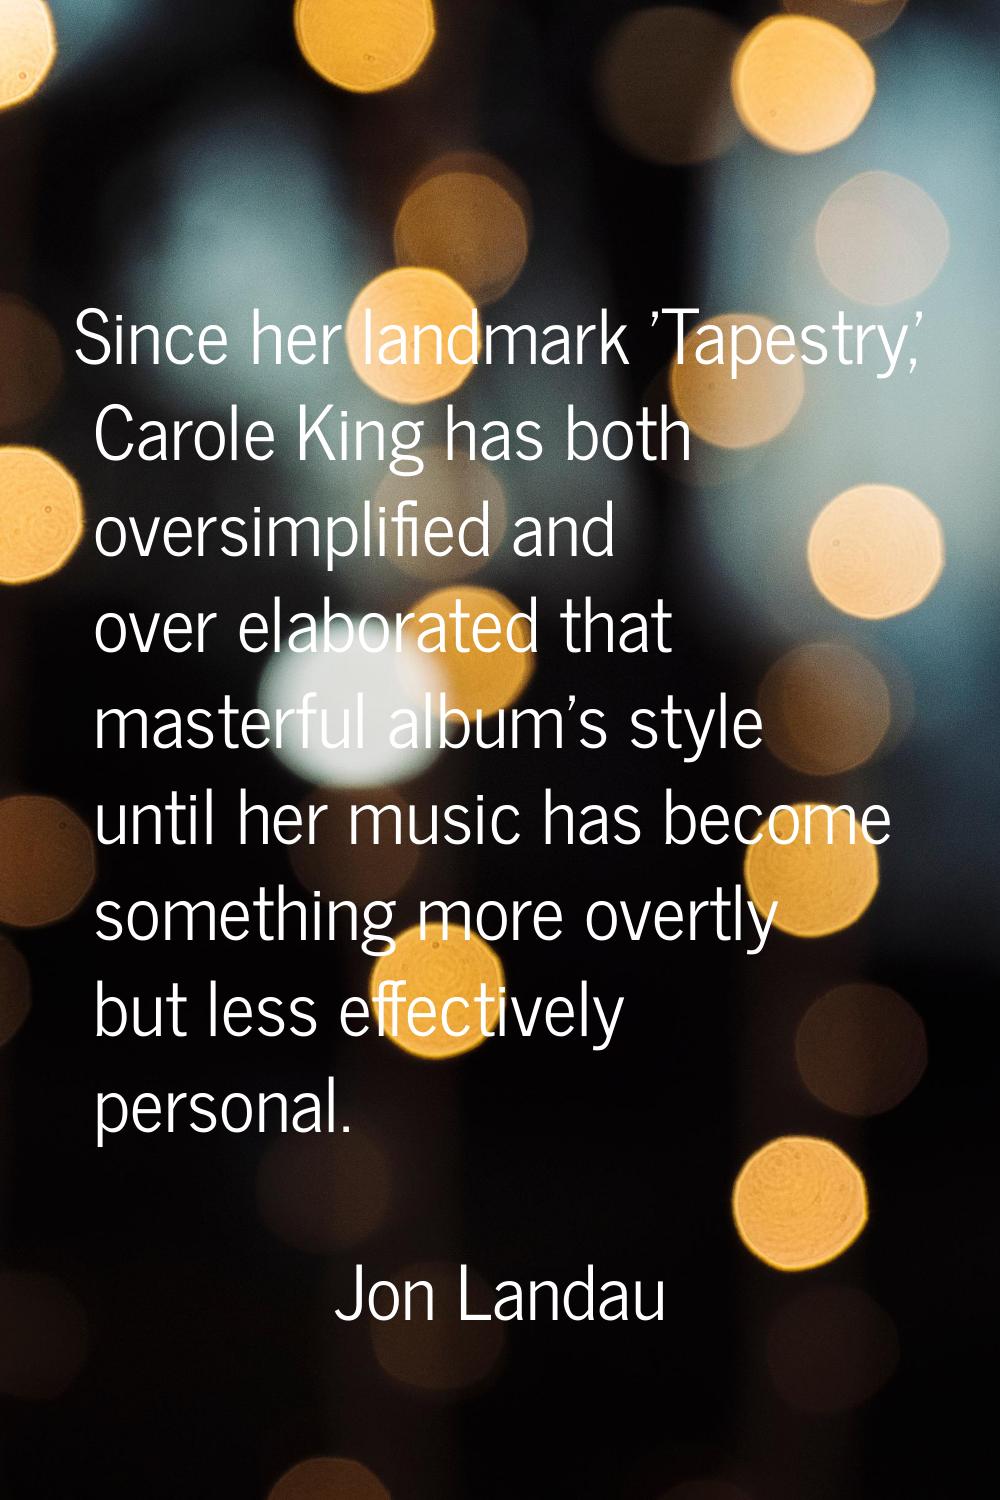 Since her landmark 'Tapestry,' Carole King has both oversimplified and over elaborated that masterf